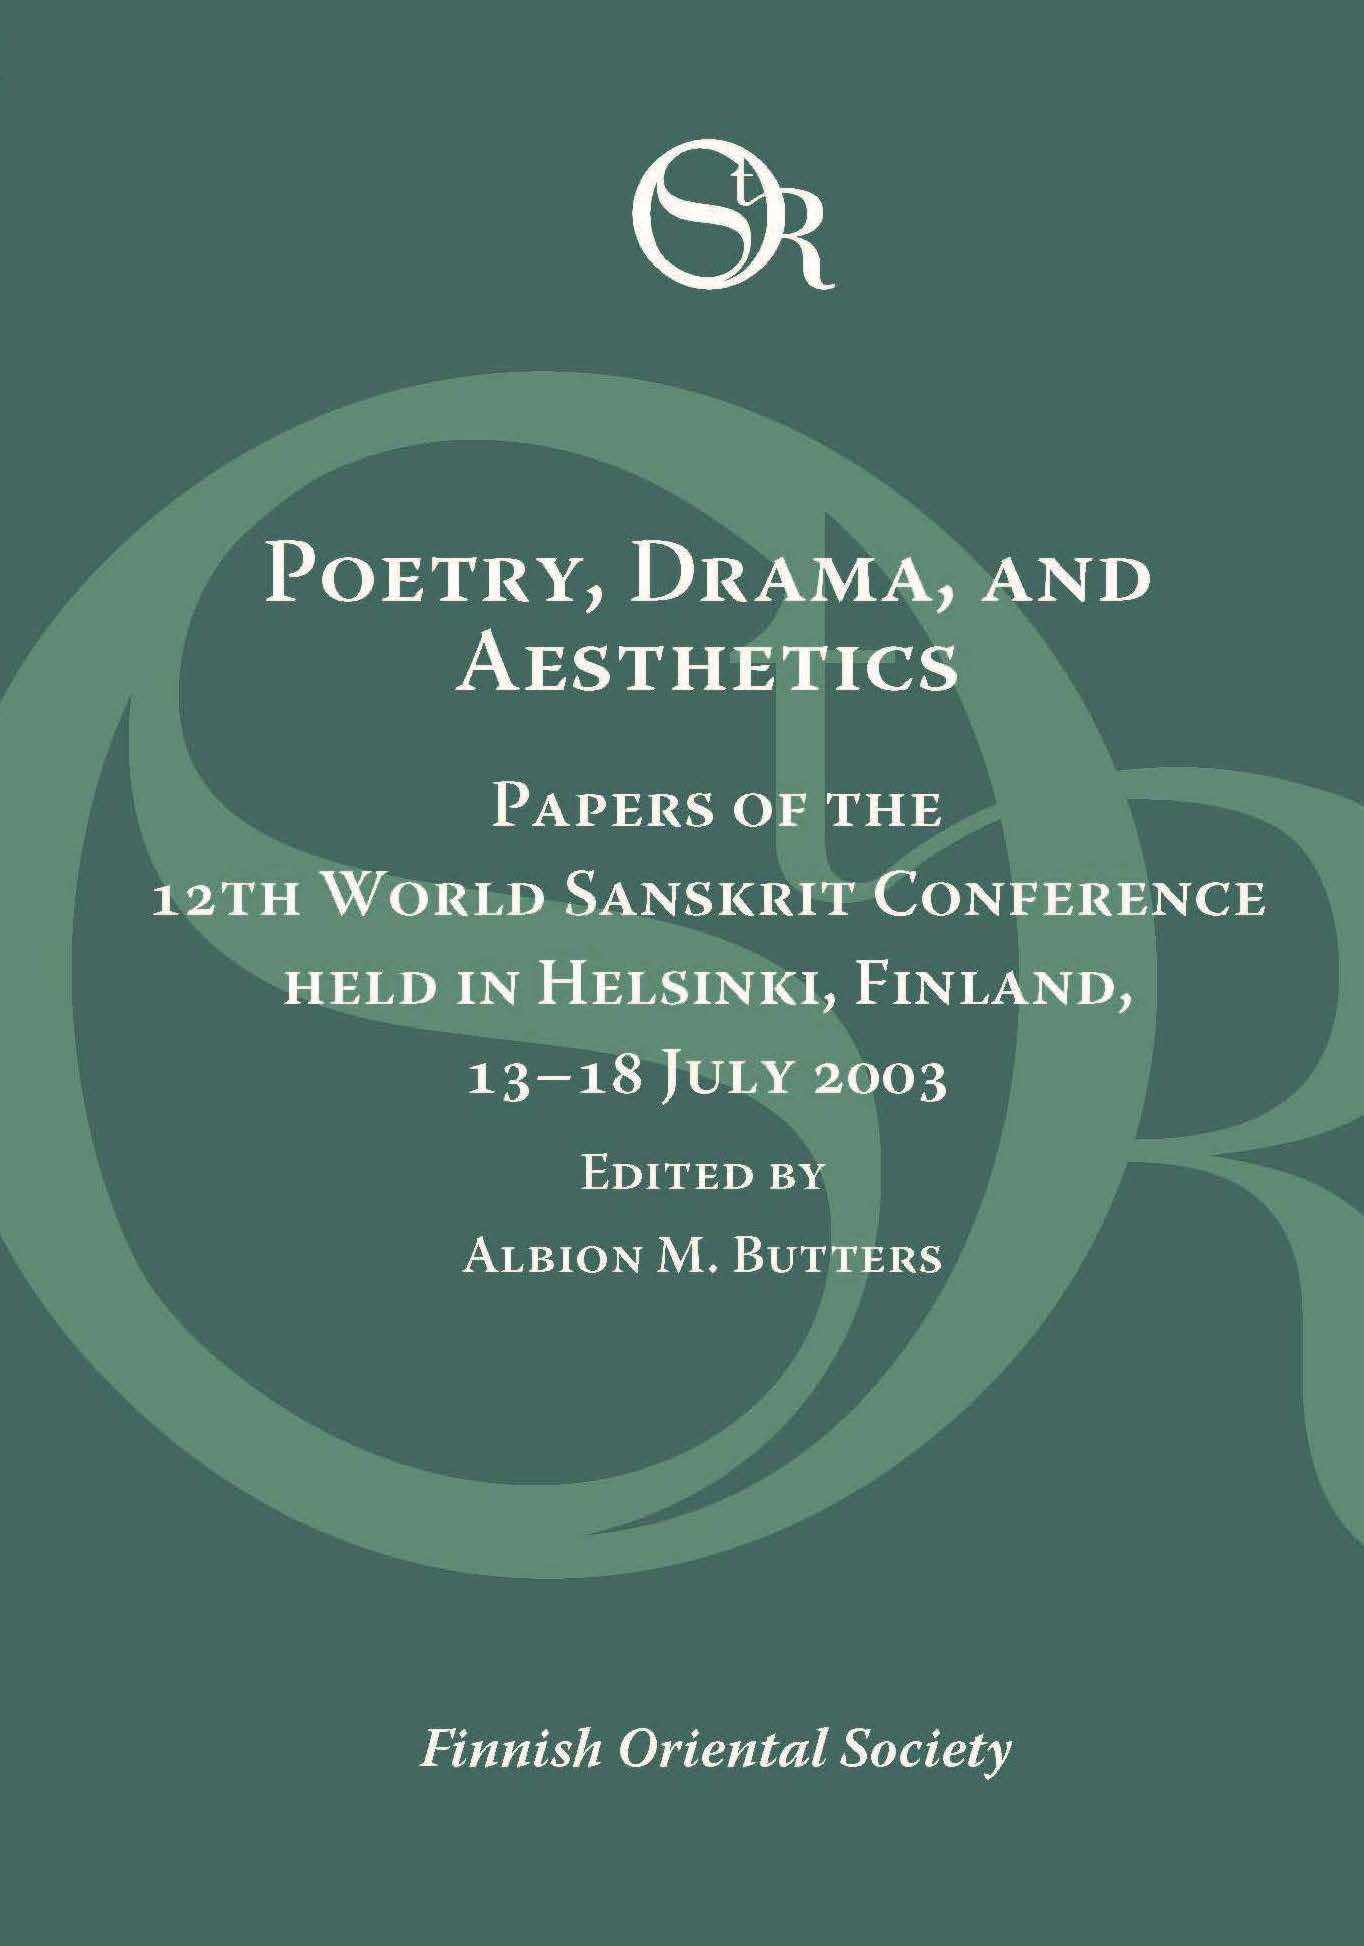 					View Vol. 123 (2022): Poetry, Drama, and Aesthetics : Papers of the 12th World Sanskrit Conference held in Helsinki, Finland, 13–18 July 2003
				